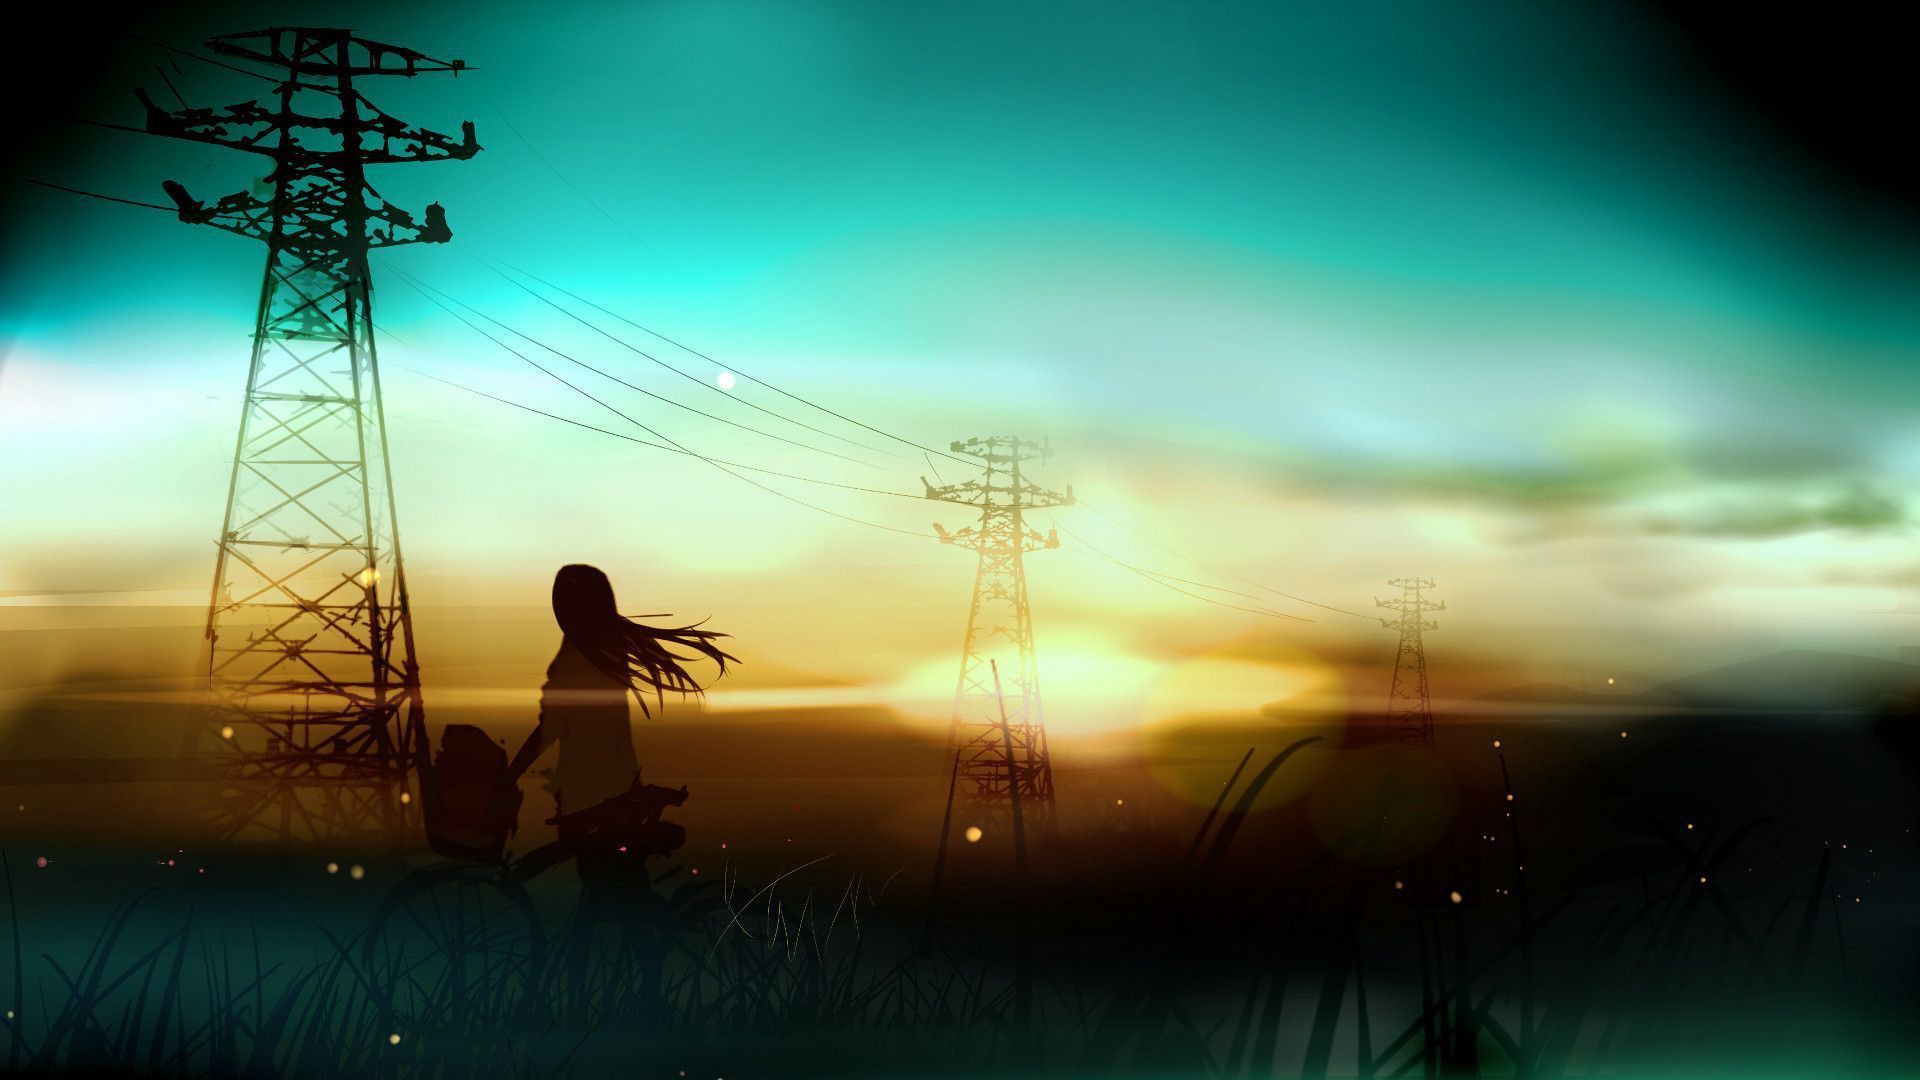 Anime 1920x1080 anime artwork sunset bicycle anime girls power lines silhouette utility pole turquoise